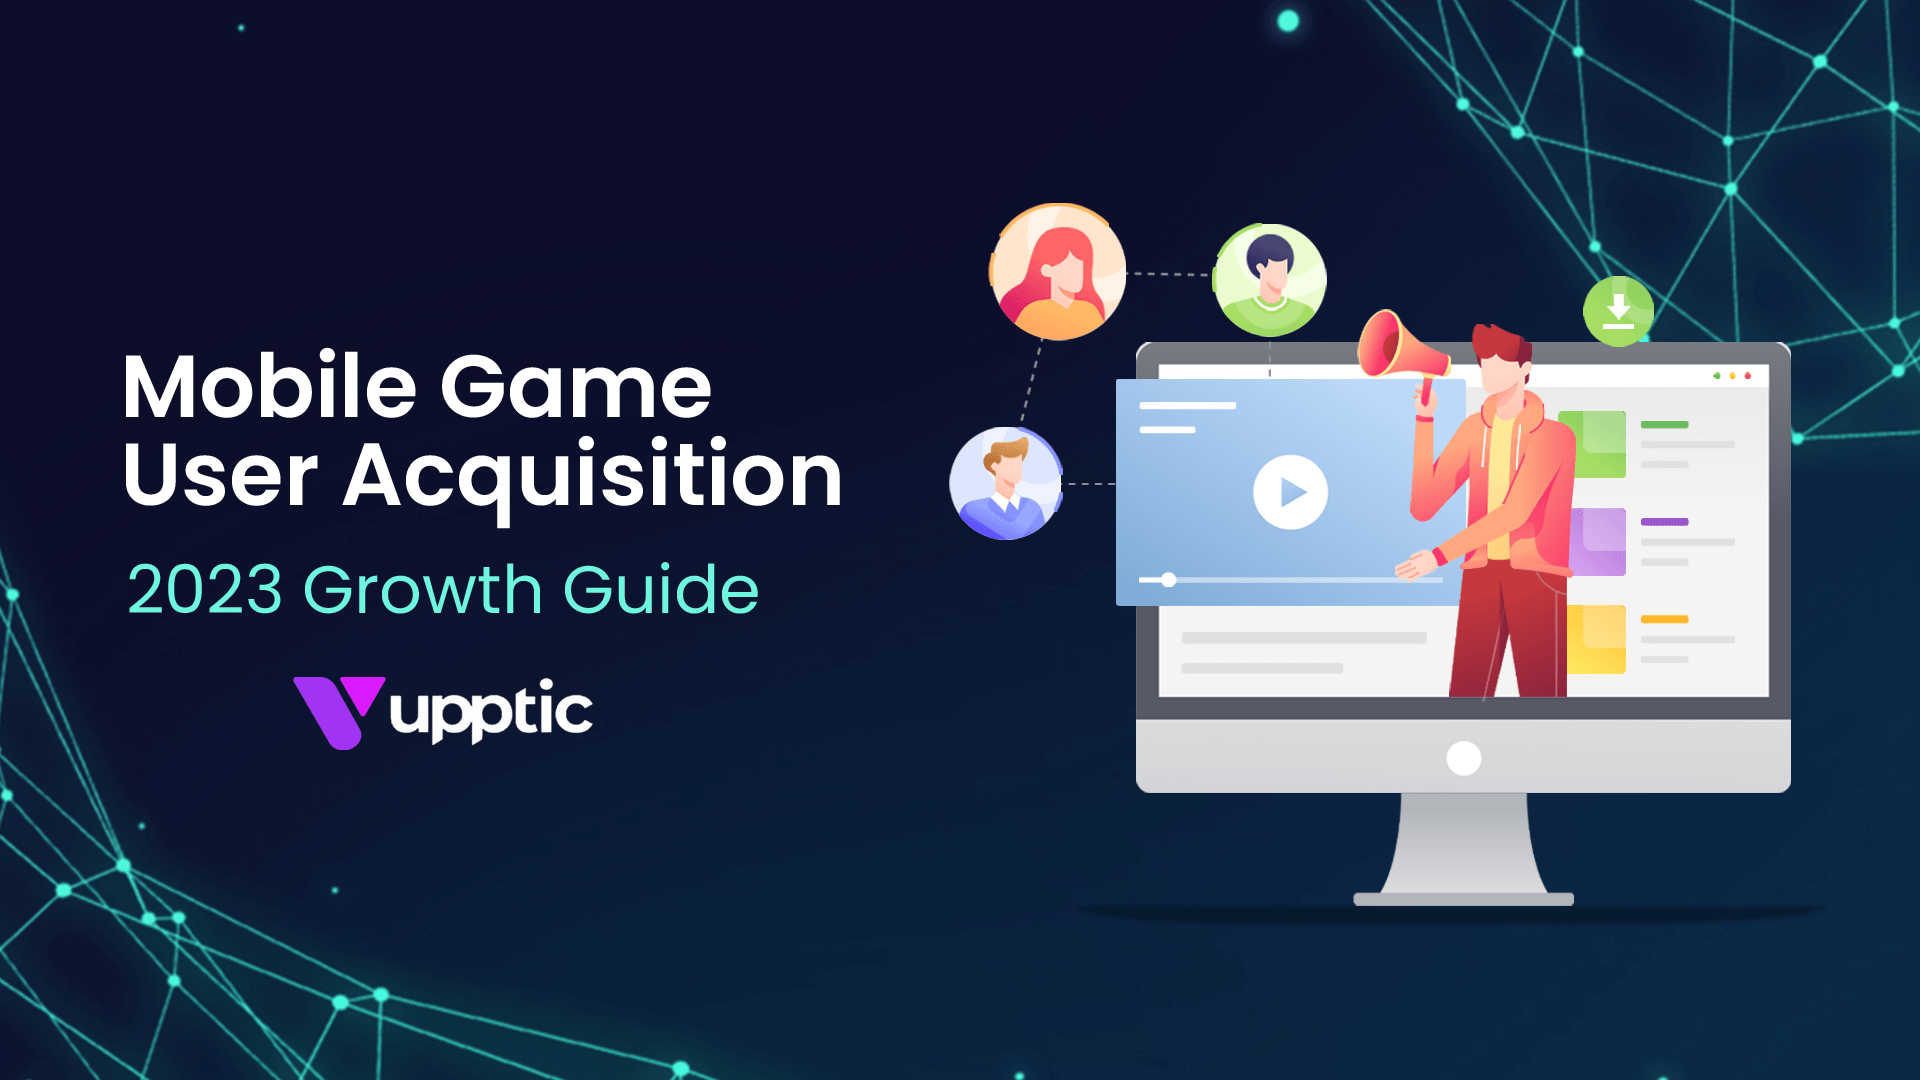 Mobile Game User Acquisition: 2023 Growth Guide